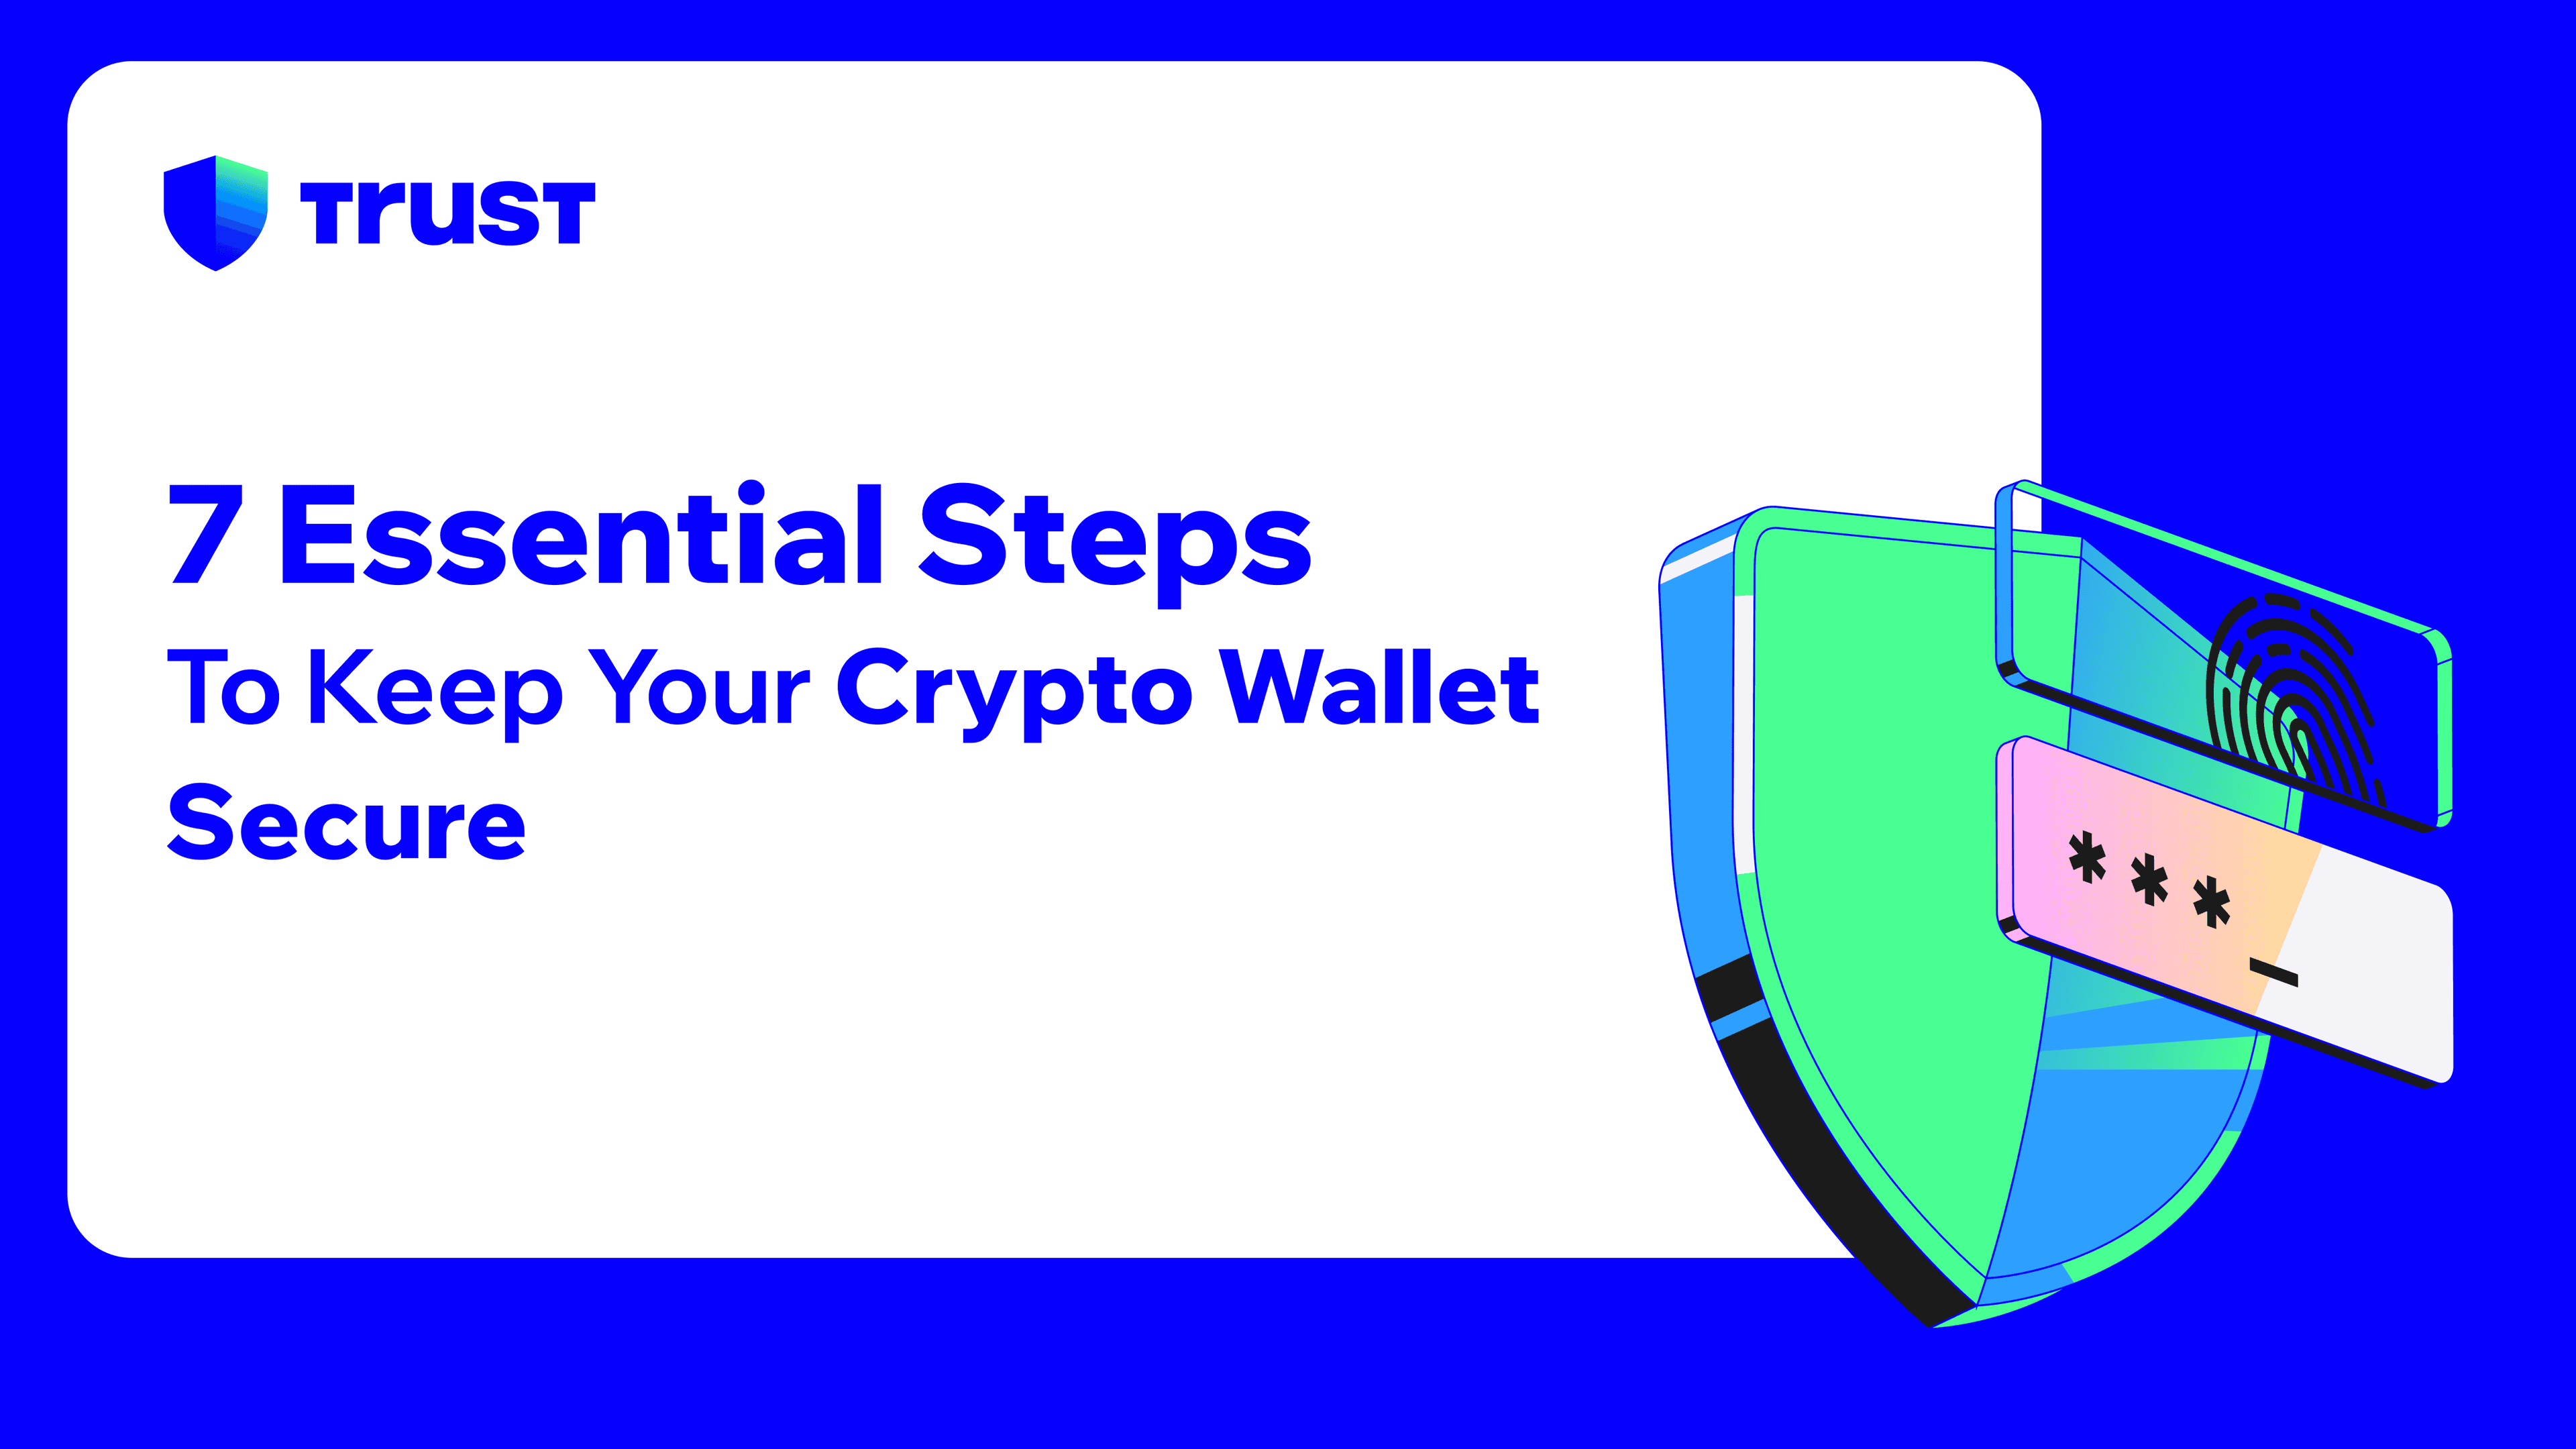 7 Essential Steps to Keep Your Crypto Wallet Secure